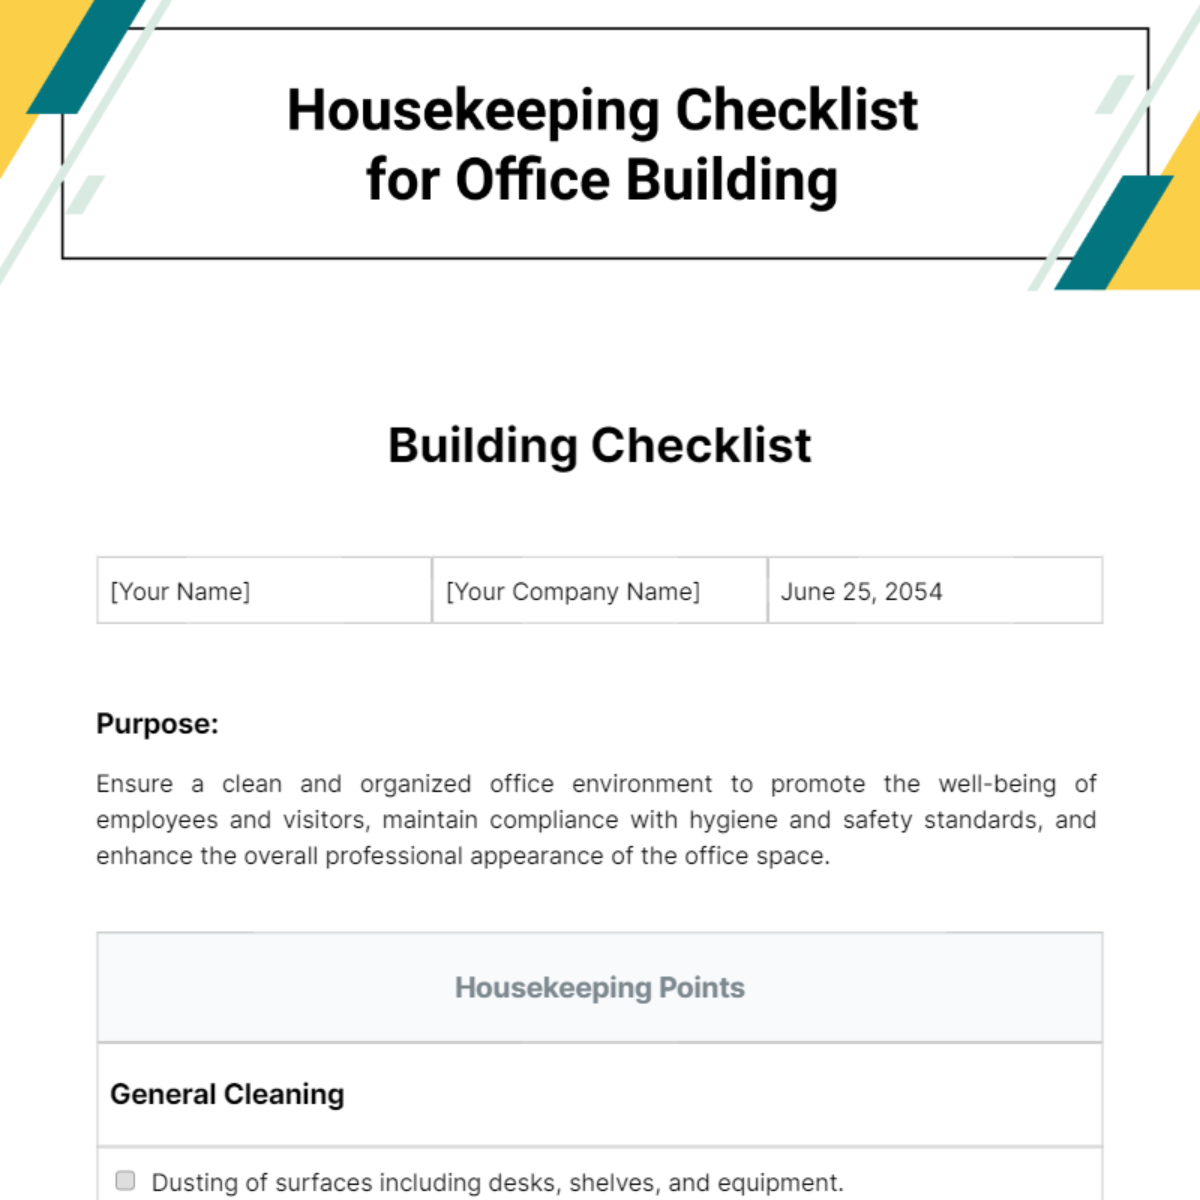 Free Housekeeping Checklist for Office Building Template